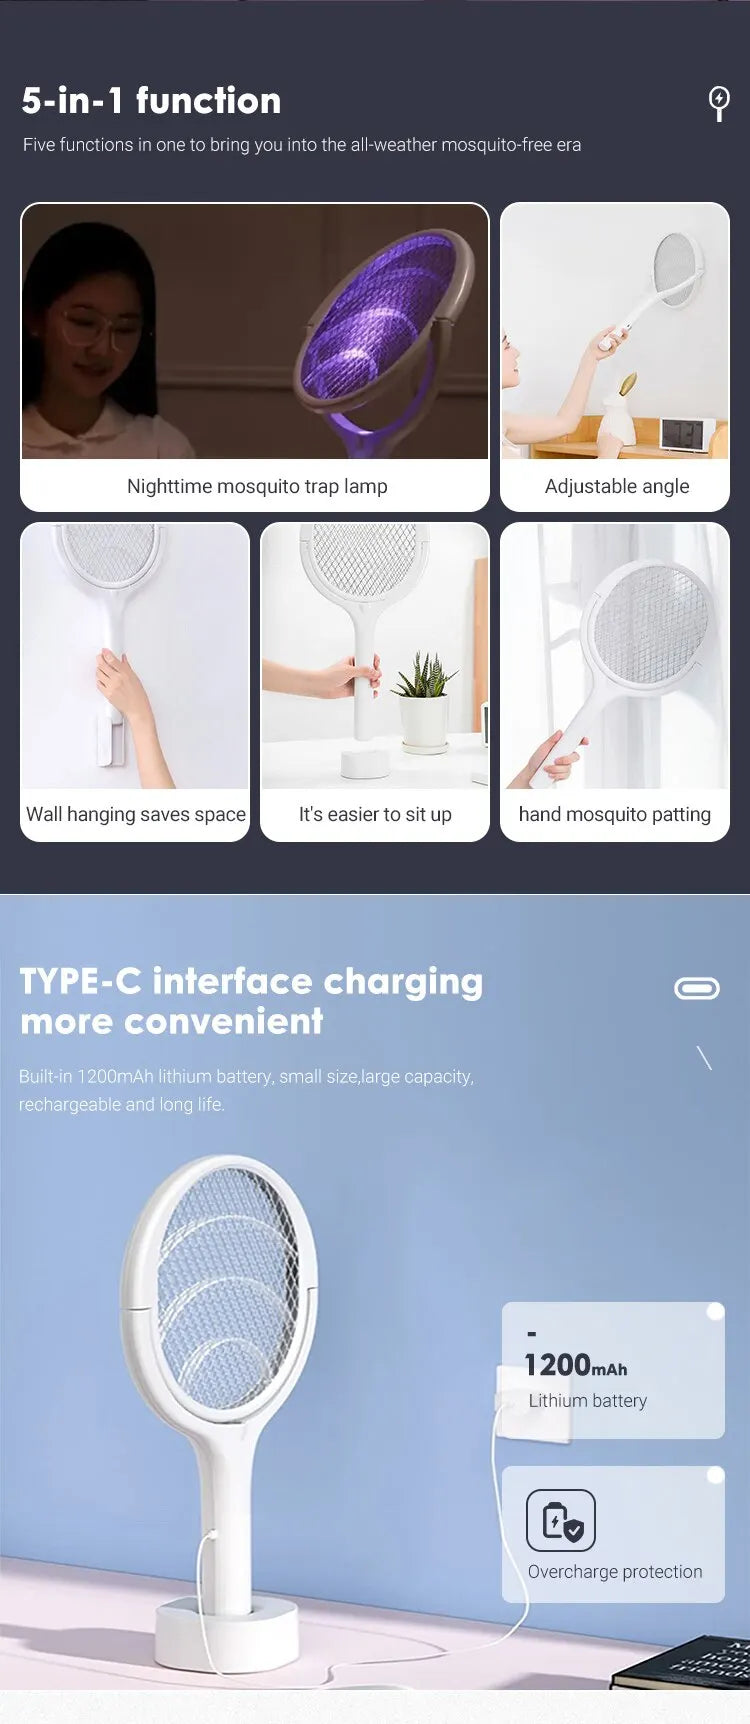 Multi-Function Electric Mosquito Swatter with Fast Charging Lamp